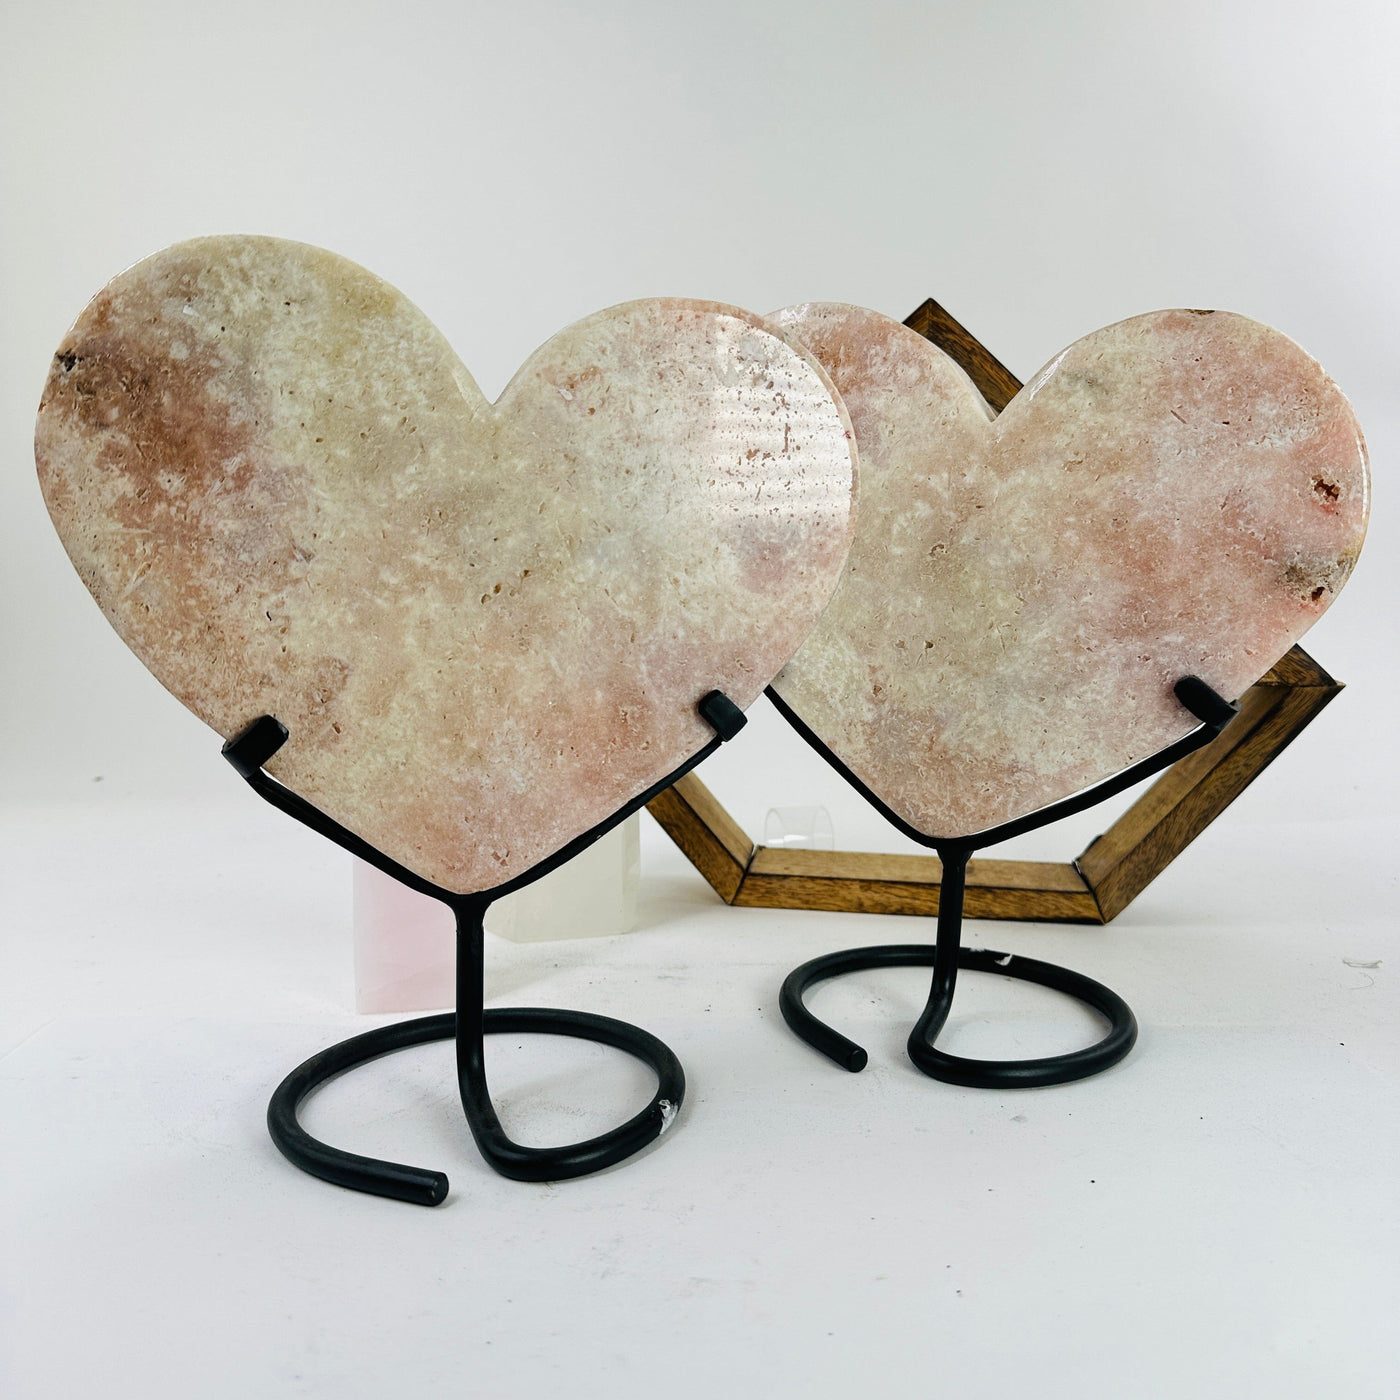 pink amethyst heart on metal stand with decorations in the background